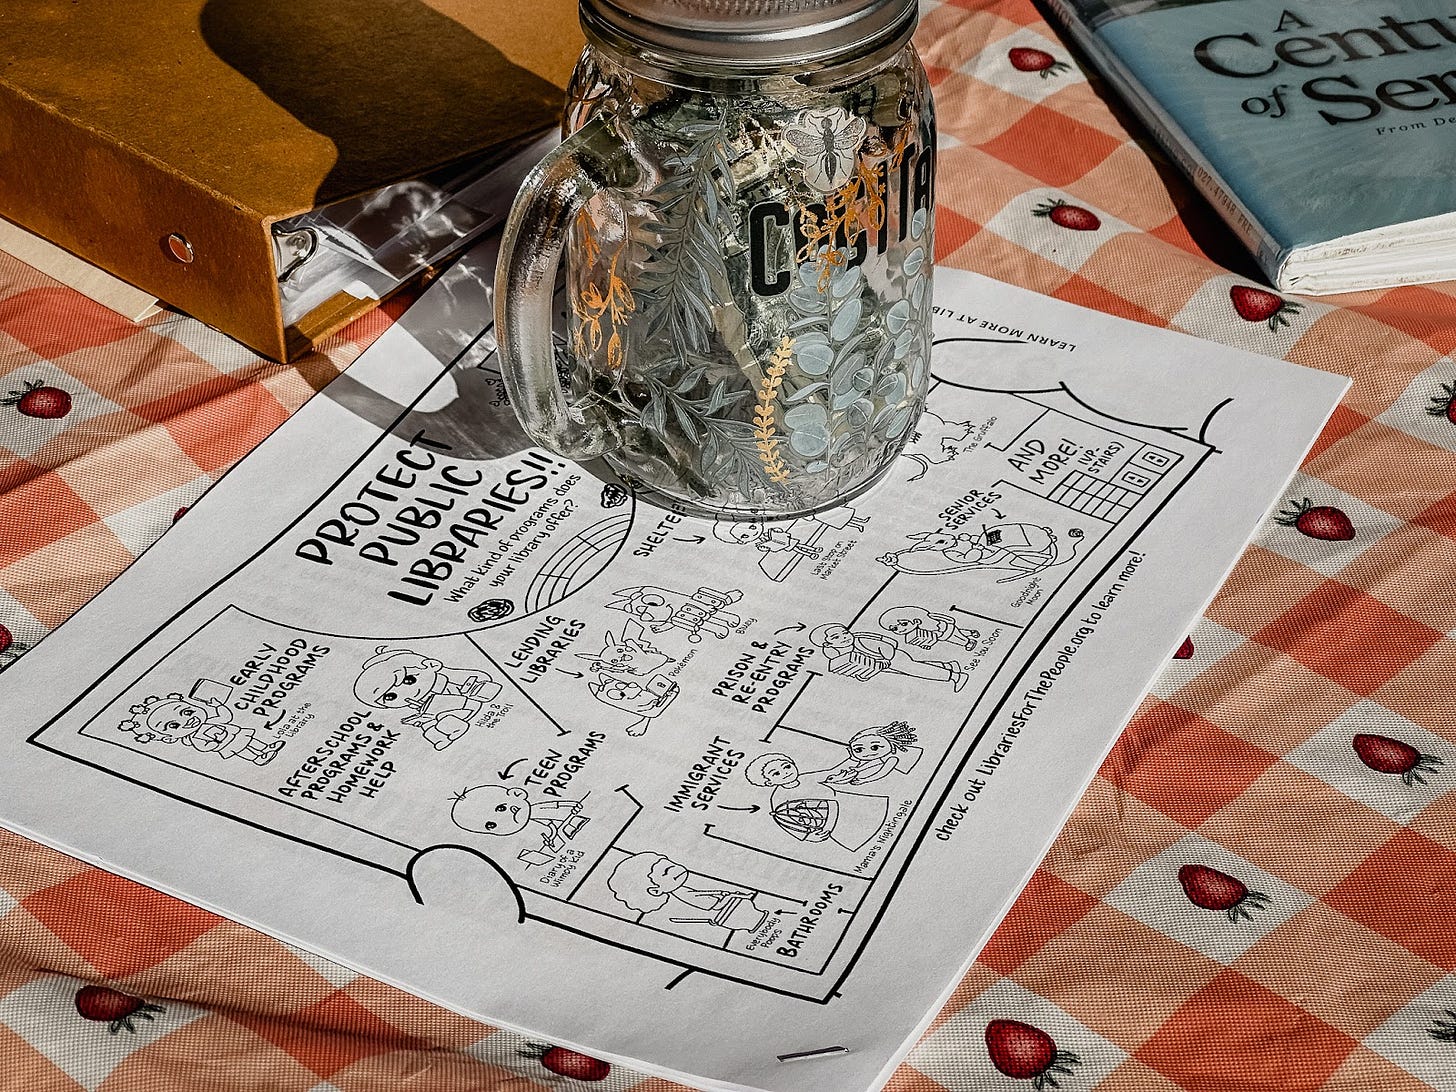 A close up photo of a lemonade stand table with an orange and white gingham/checkered tablecloth with strawberries in the white spots. There is a brown binder in the corner as well as a book. There is a mason jar with a handle on top of a printout about why protecting public libraries is important that is illustrated in a cartoon style